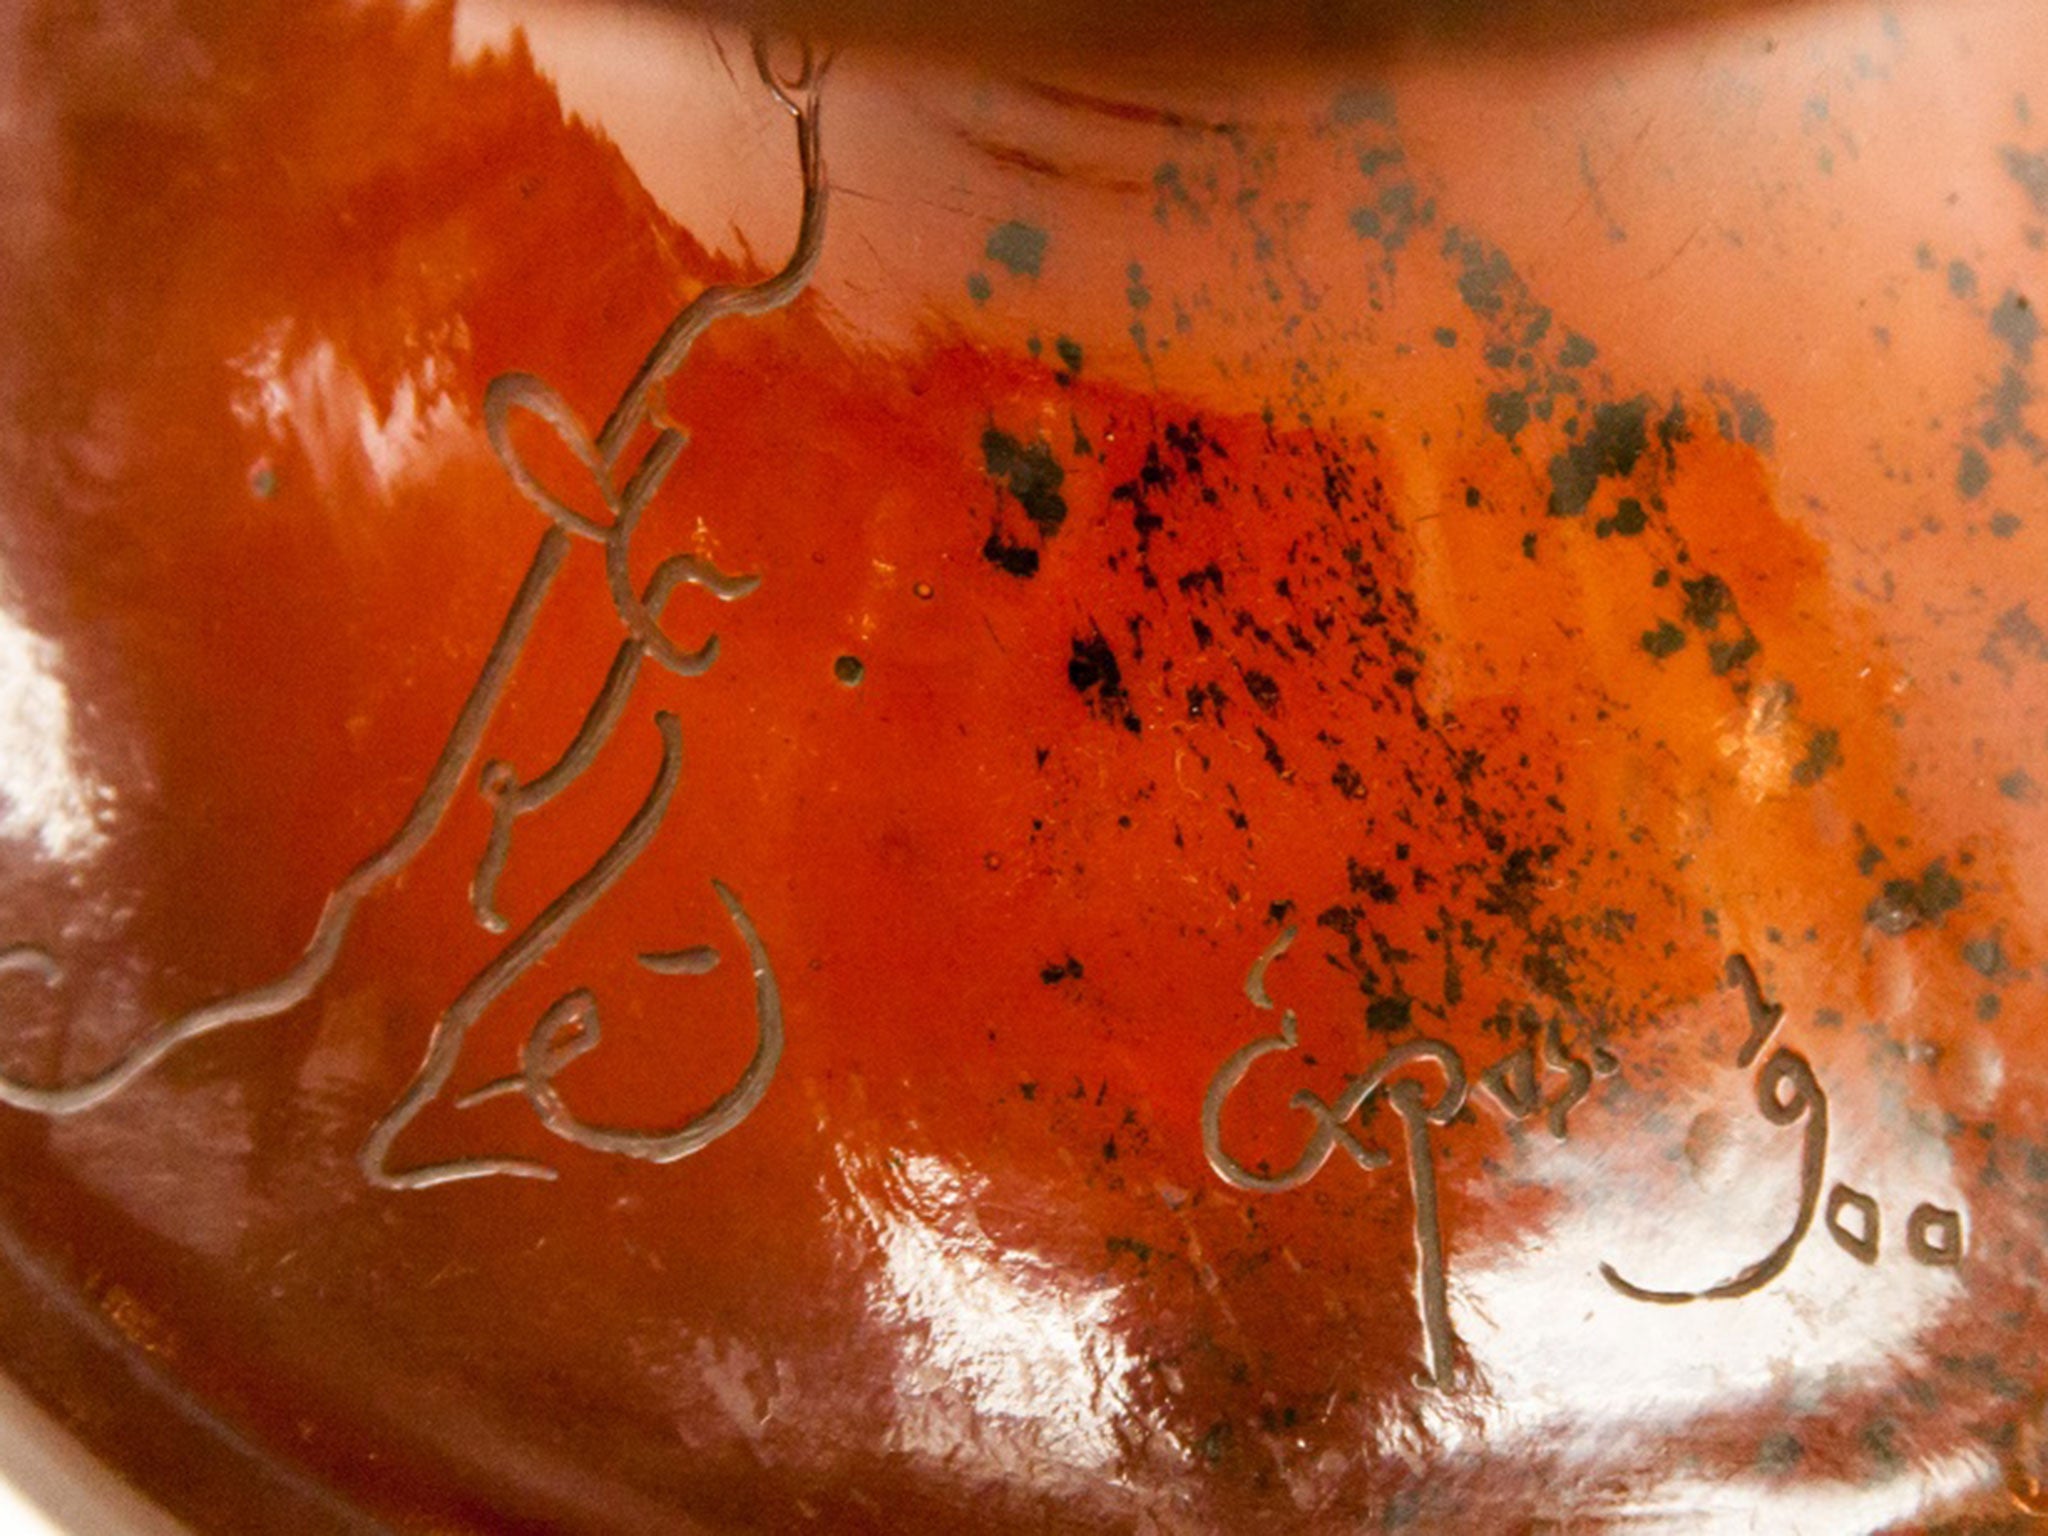 &#13;
A detail of the vase&#13;